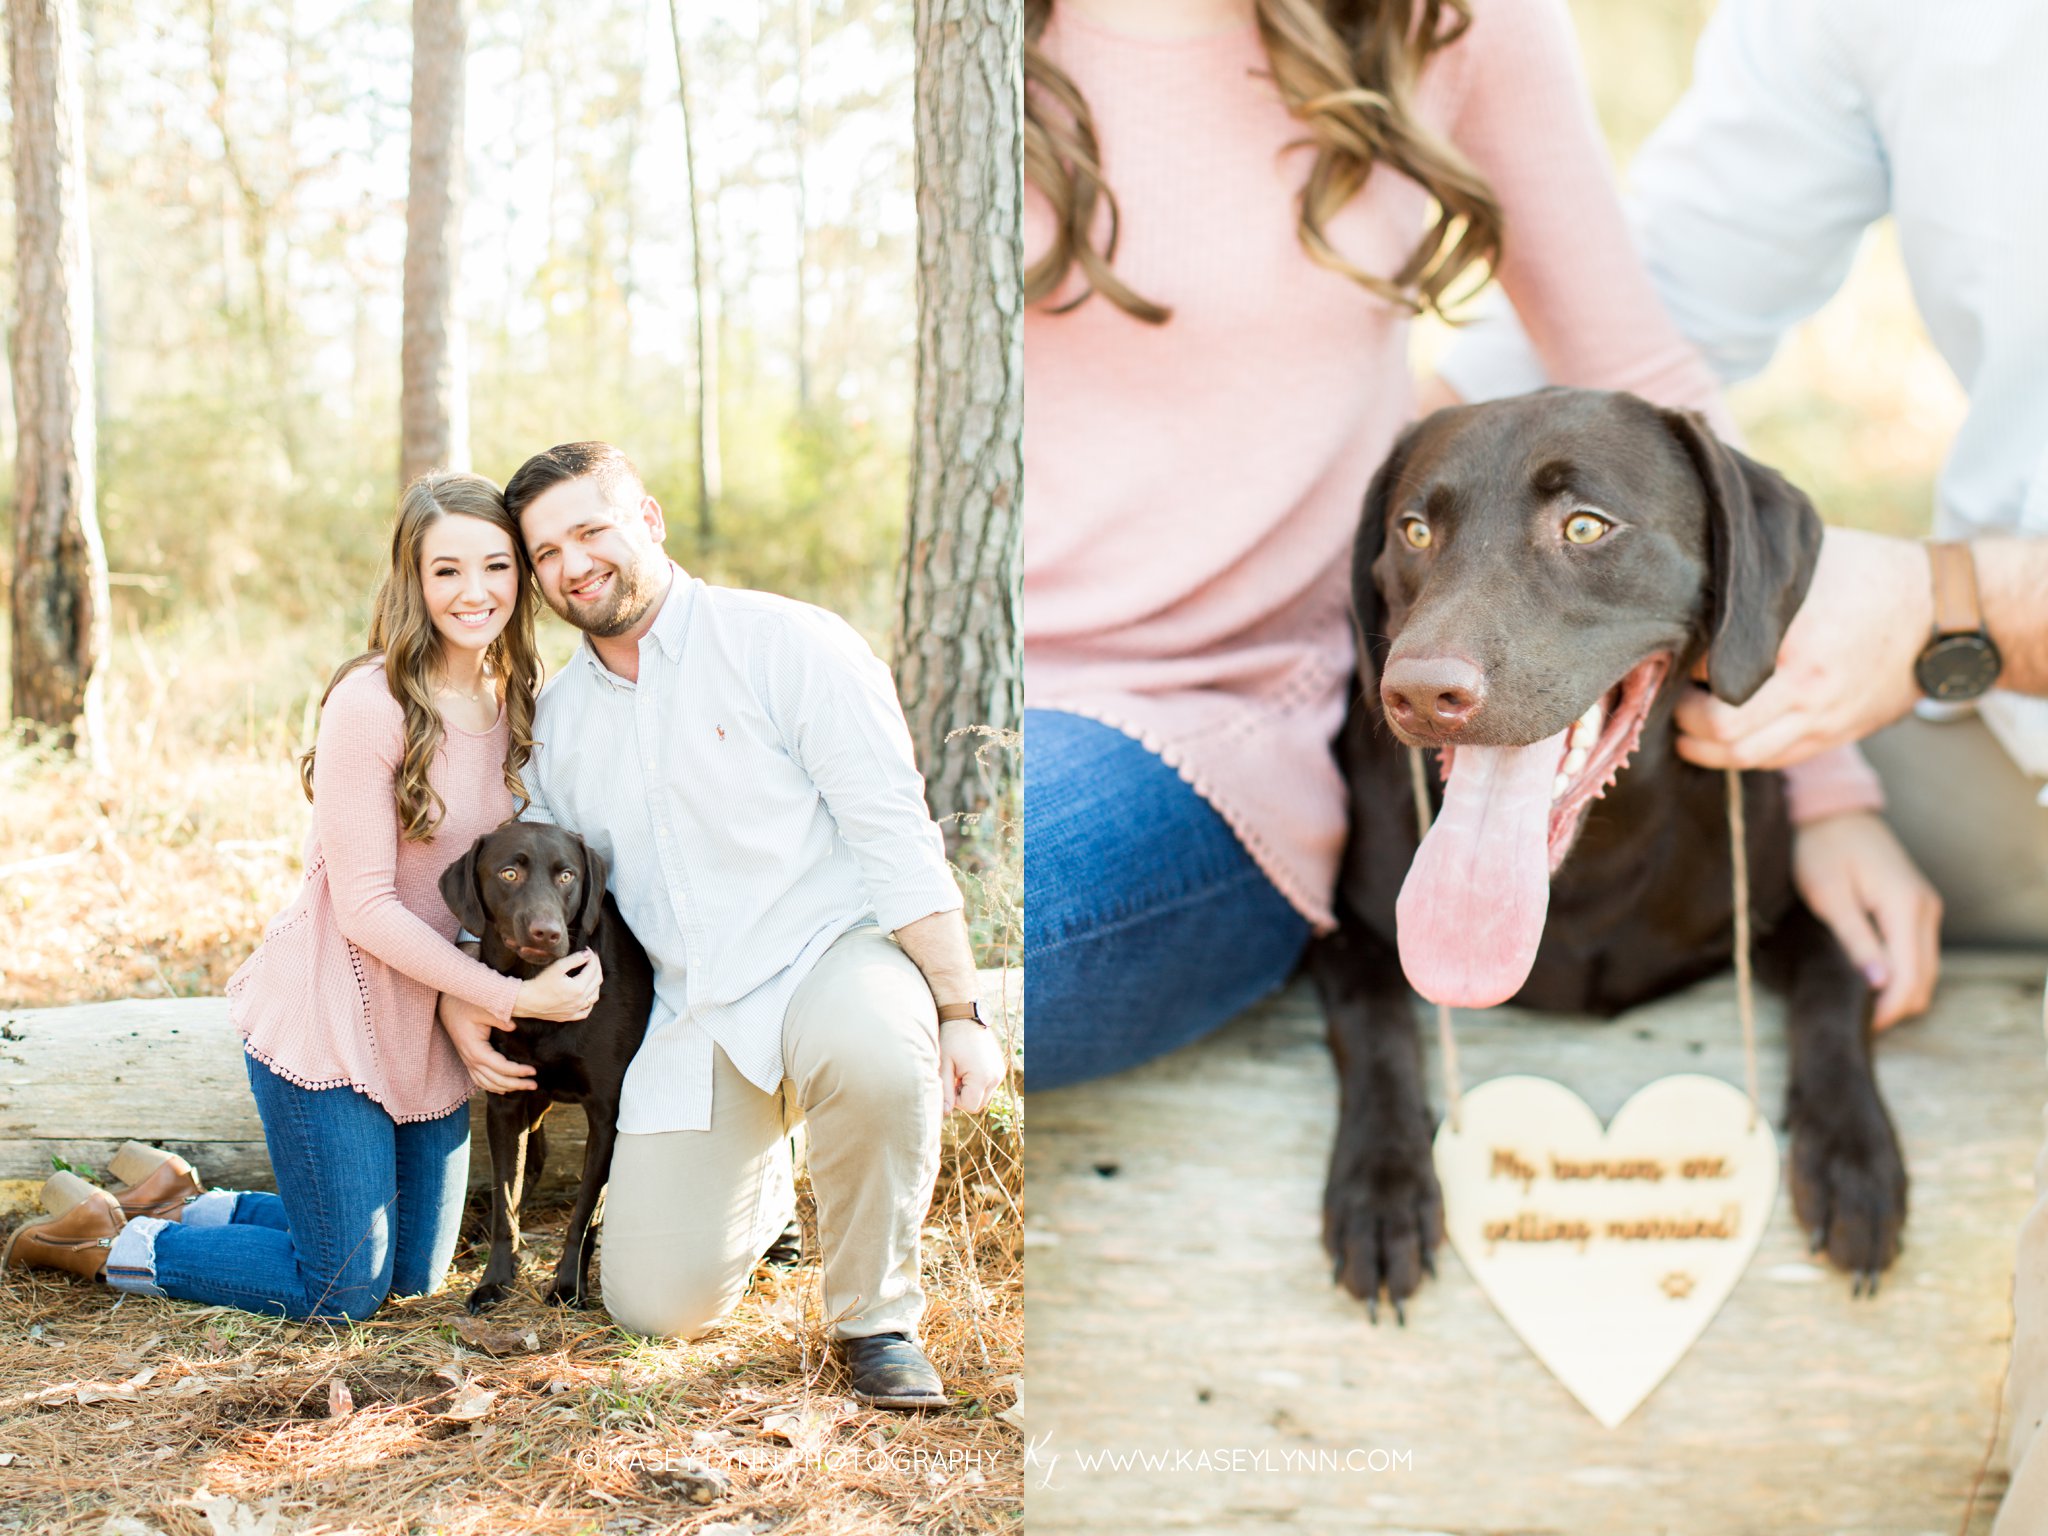 Engagement session with dogs / Kasey Lynn Photography